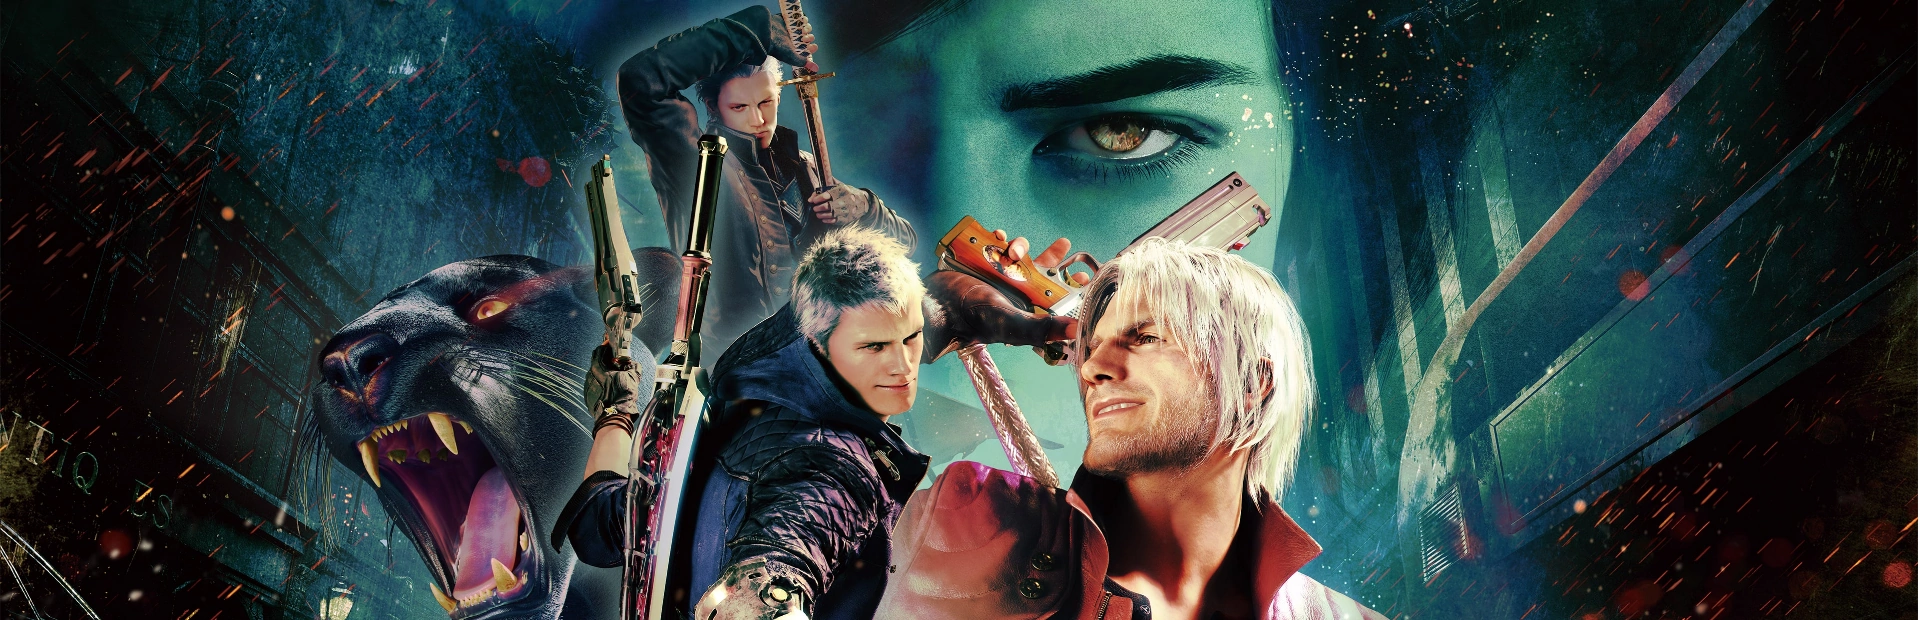 DEVIL MAY CRY 5.banner1